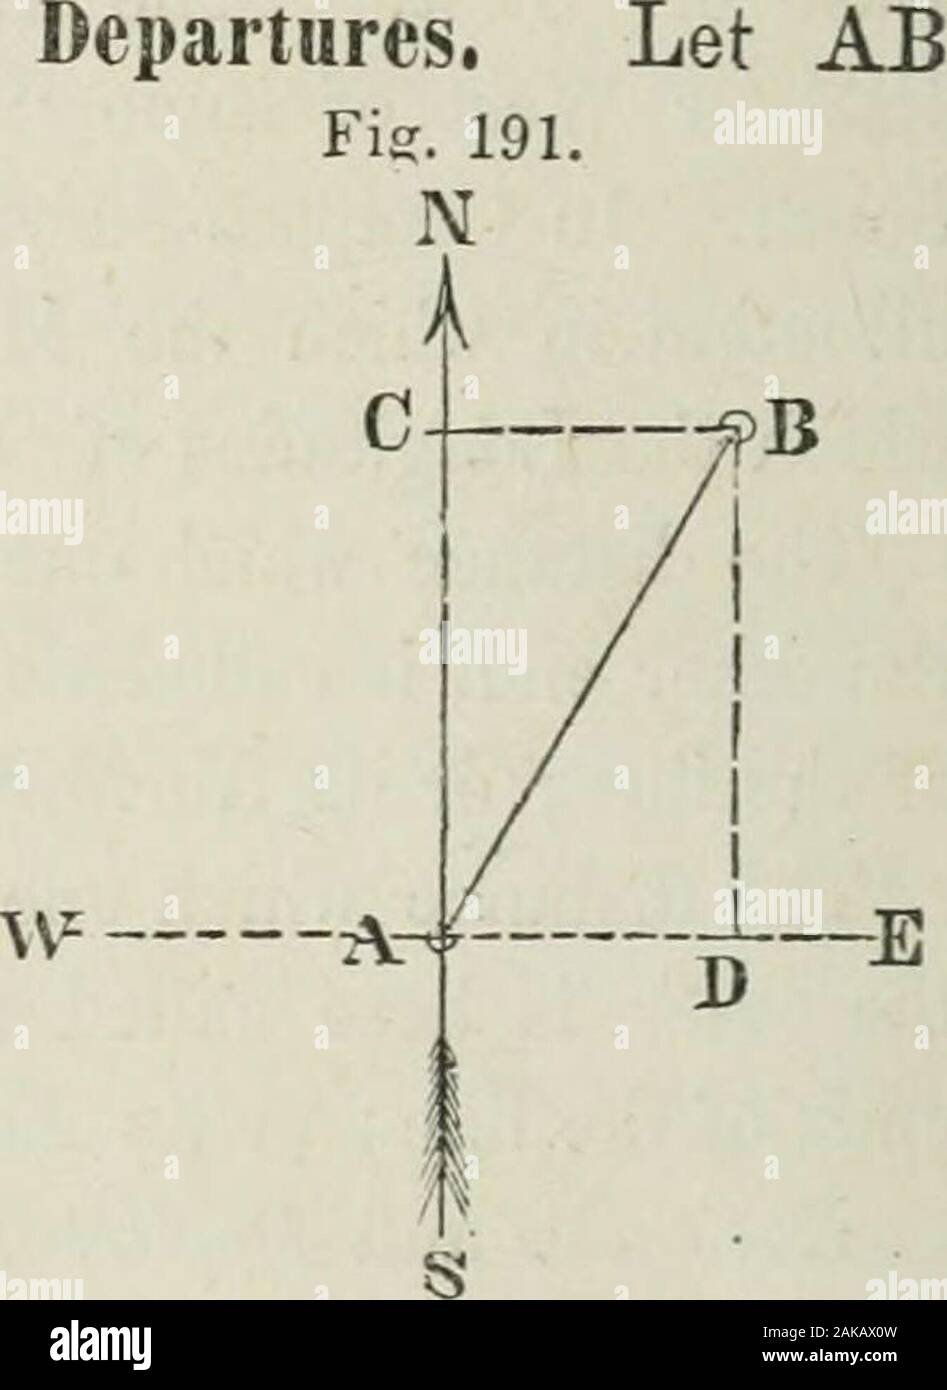 A treatise on land-surveying; comprising the theory developed from five elementary principles; and the practice with the chain alone, the compass, the transit, the theodolite, the plane table, &cIllustrated by four hundred engravings, and a magnetic chart . (279) Calculation of Latitudes and Departures. be a given hue, of which the lengthAB, and the bearing (or angle, BAC,which it makes with the MagneticMeridian), are known. It is requiredto find the differeiices of Latitude andof Longitude between its two extremi-ties A and B: that is, to find AC andCB; or, what is the same tiling, BDand DA. Stock Photo